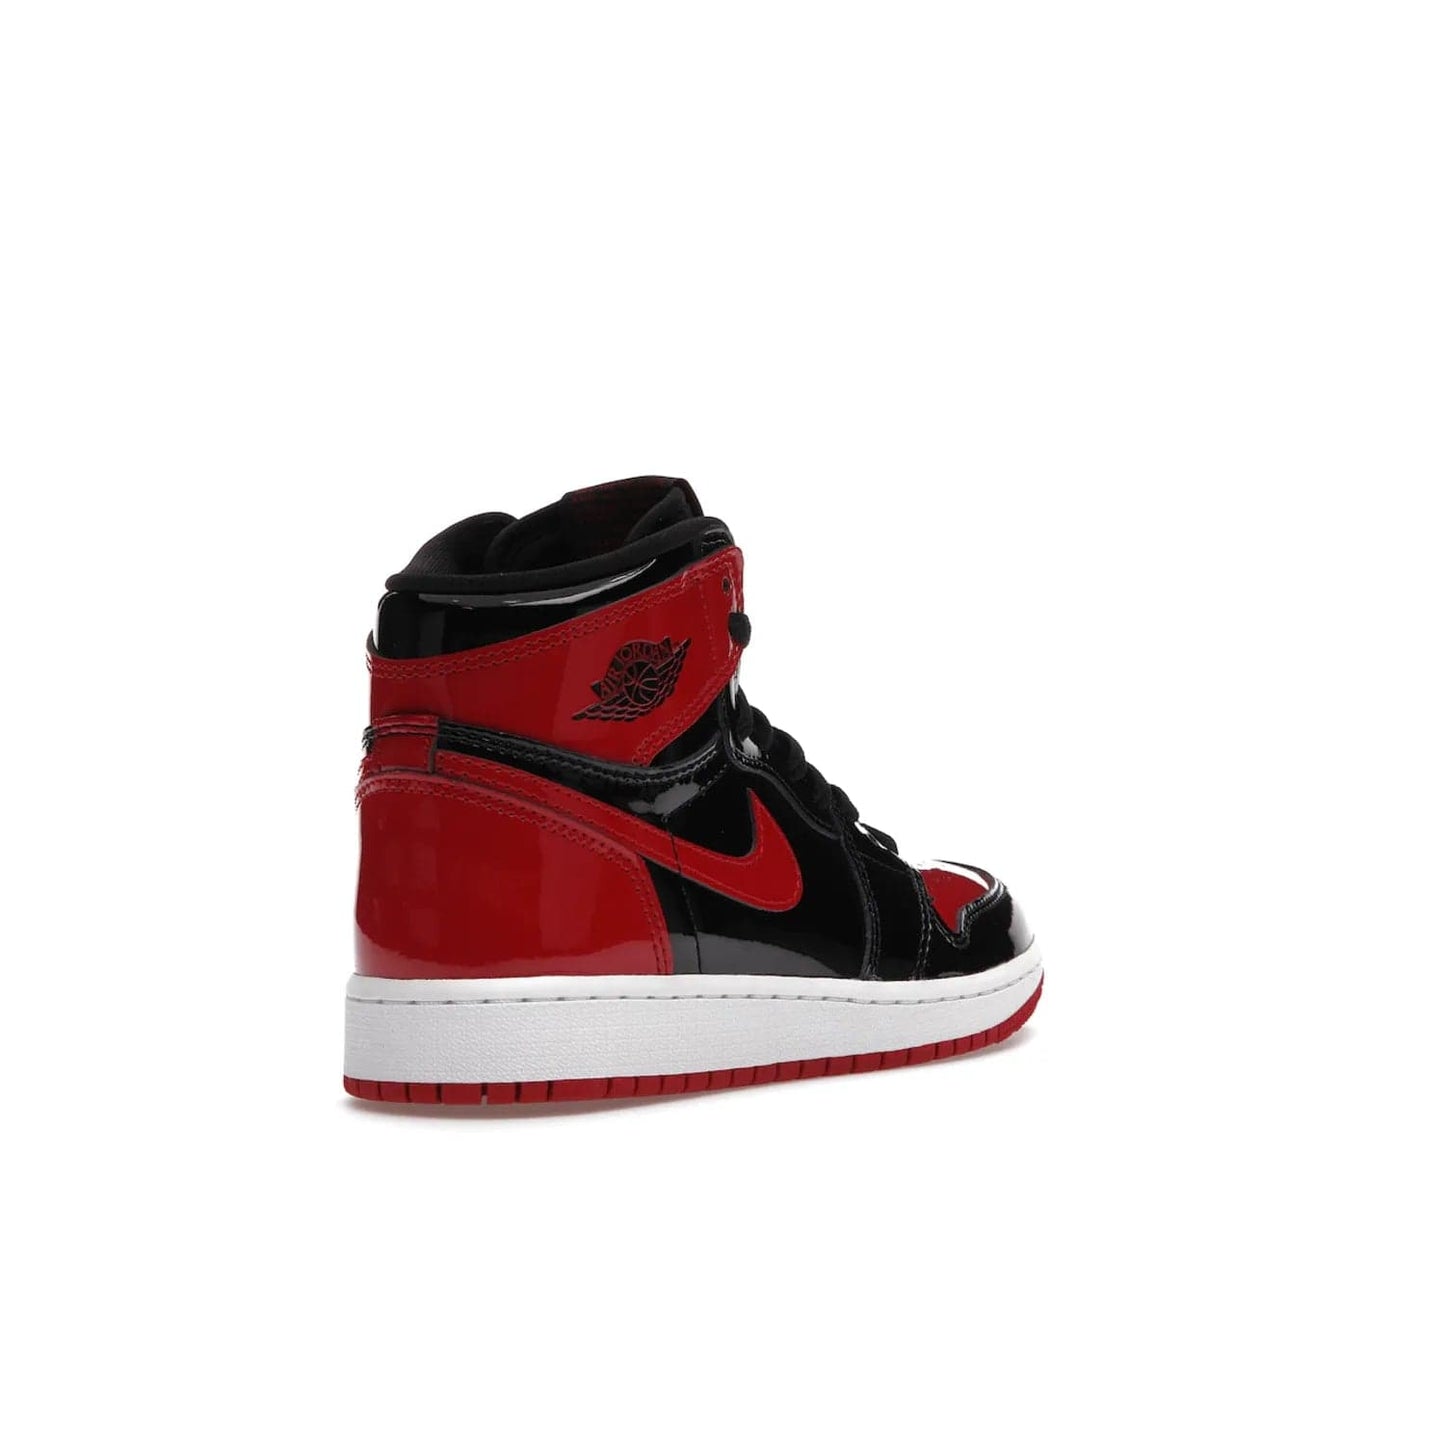 Jordan 1 Retro High OG Patent Bred (GS) - Image 32 - Only at www.BallersClubKickz.com - Upgrade your sneaker game with the iconic Air Jordan 1 Retro High OG Bred Patent GS. Crafted with premium patent leather and basketball-inspired details for a classic look, they also feature an encapsulated Air-sole cushioning and enhanced red rubber outsole. Don't miss this timeless sneaker with a striking black, white, and varsity red colorway, dropping December 2021.